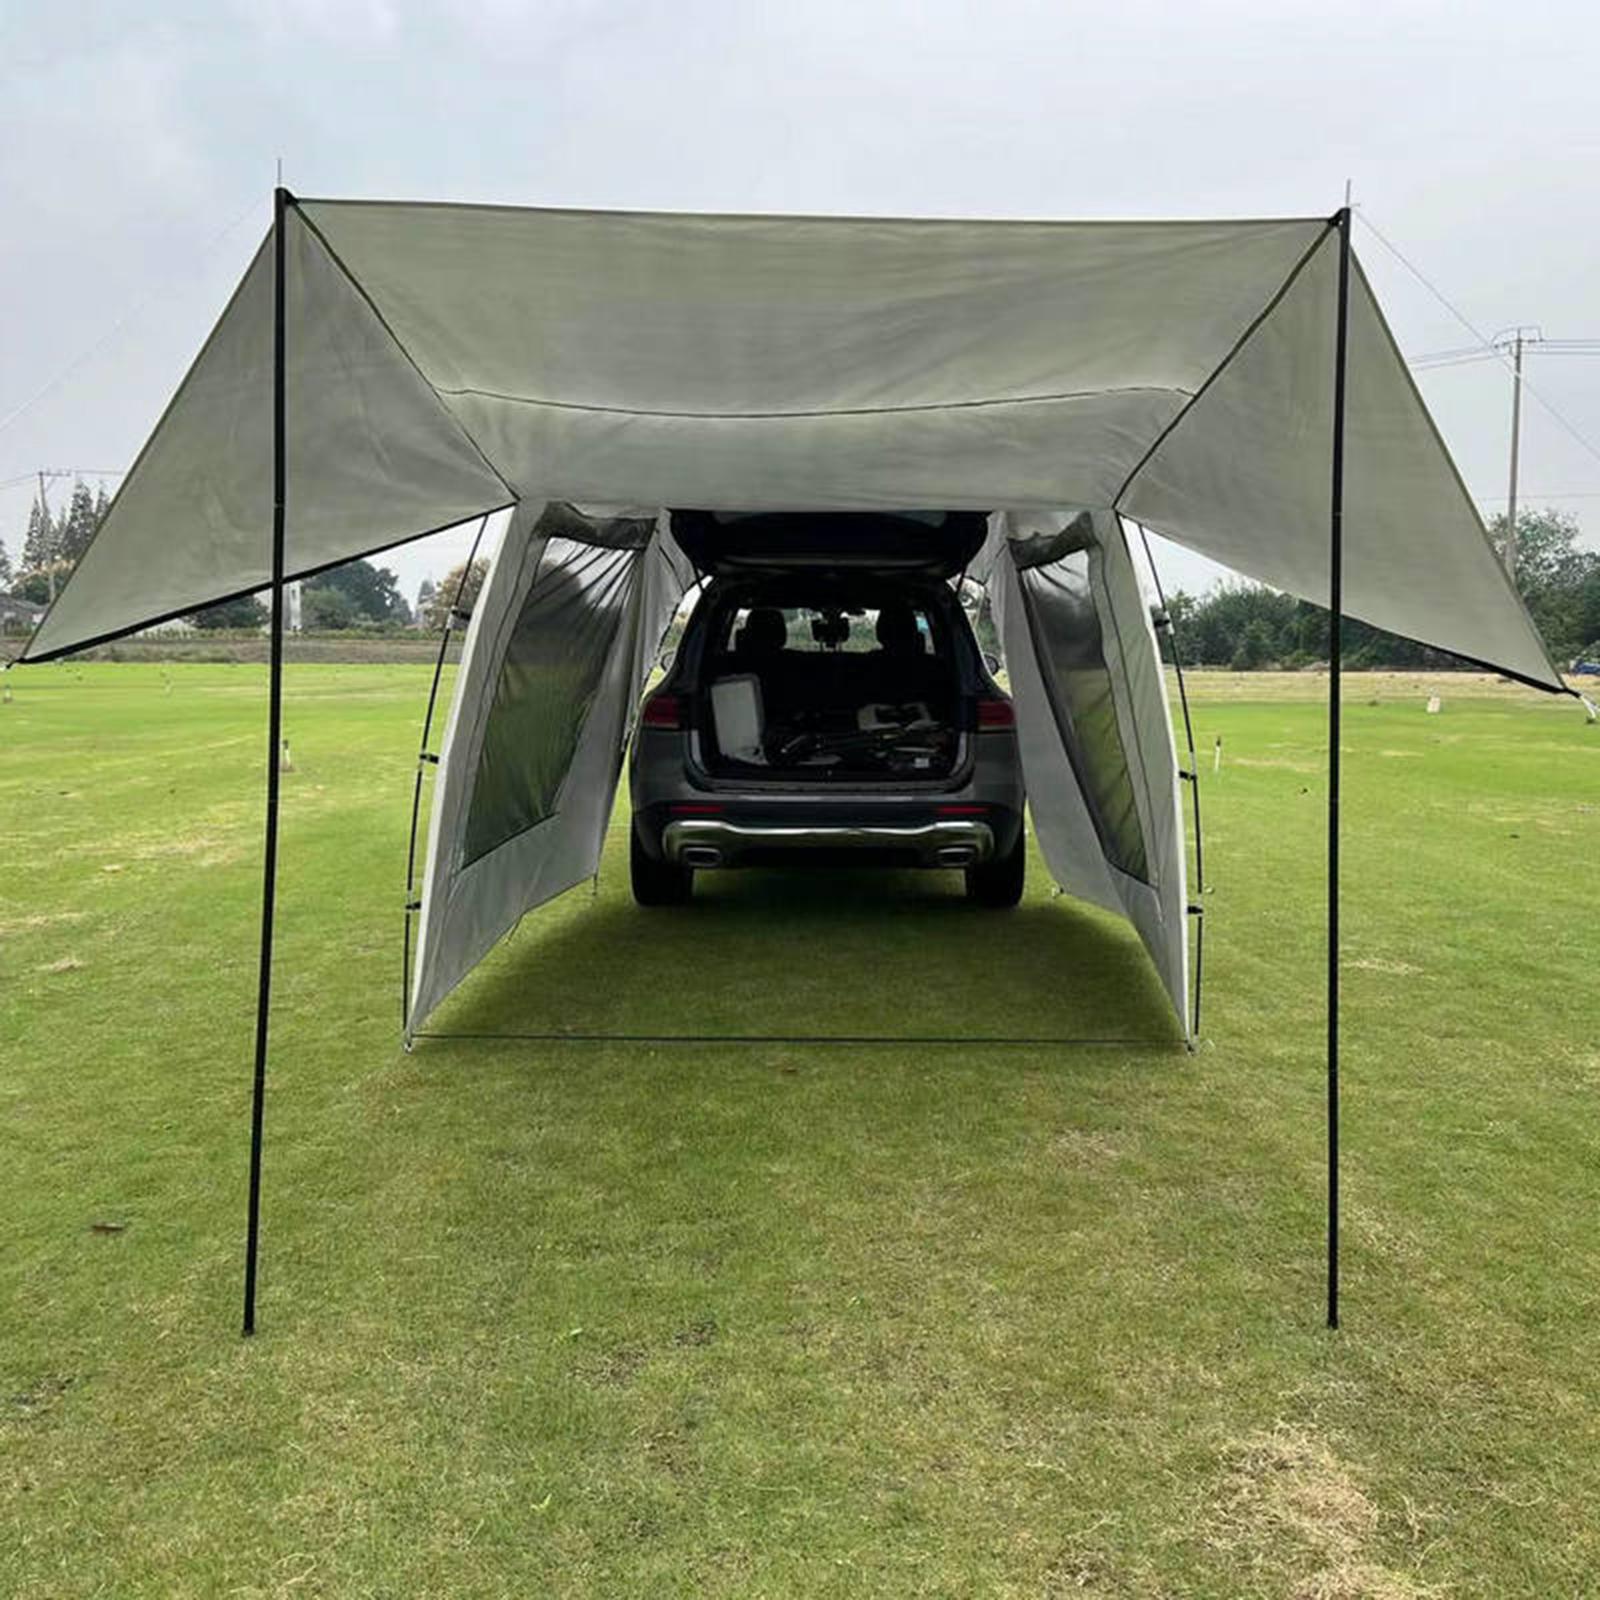 Cheap Goat Tents Car Rear Tent Extension Waterproof Camping Shelter Canopy SUV Trunk Tent Car Shade Awning for Outdoor Travel Barbecue Picnic   